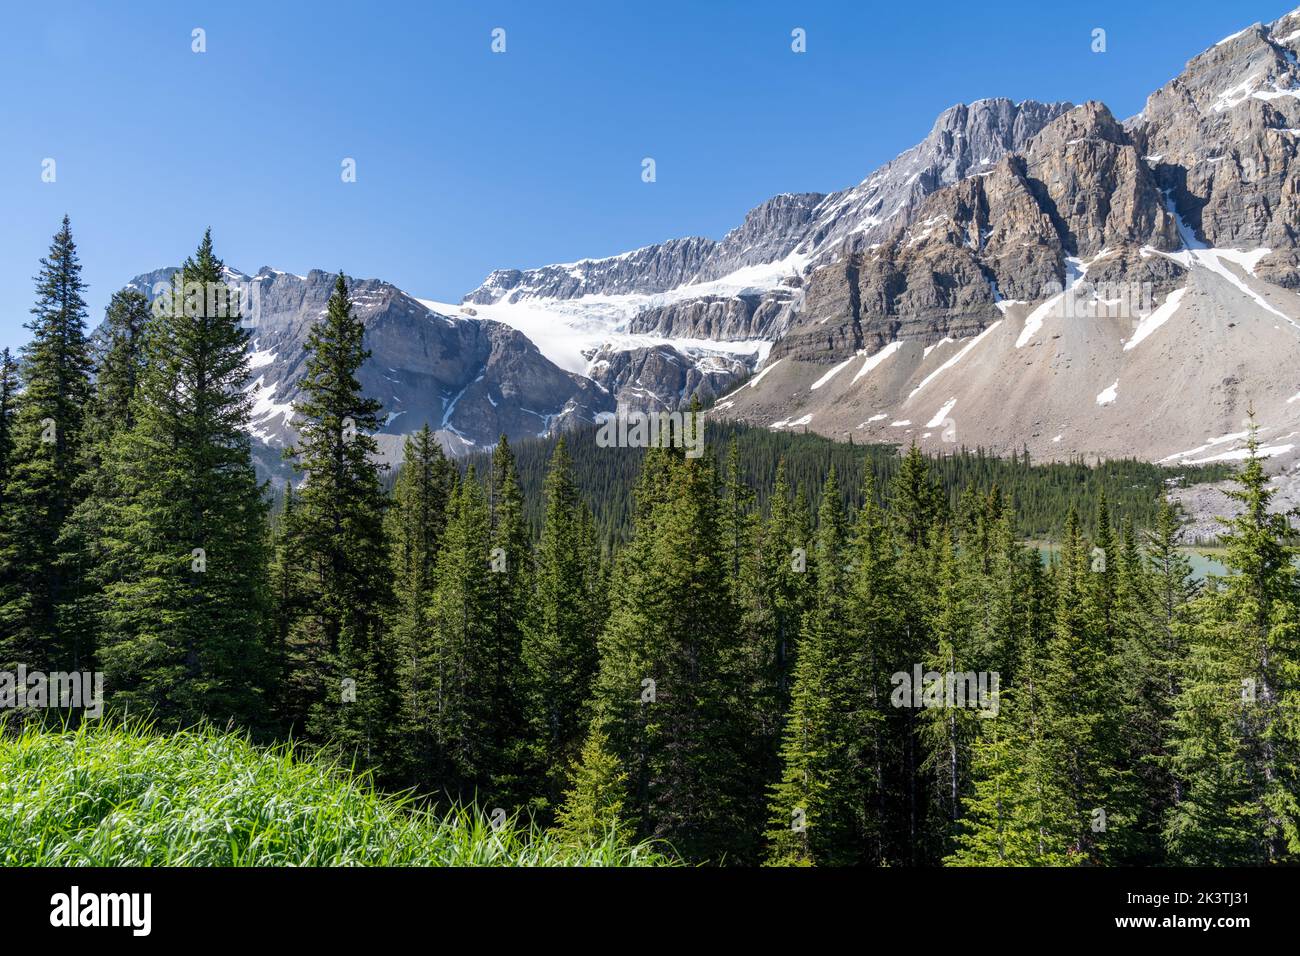 The Icefields Parkway, also known as Highway 93 road between Banff National Park and Jasper National Park in the Canadian Rockies Stock Photo